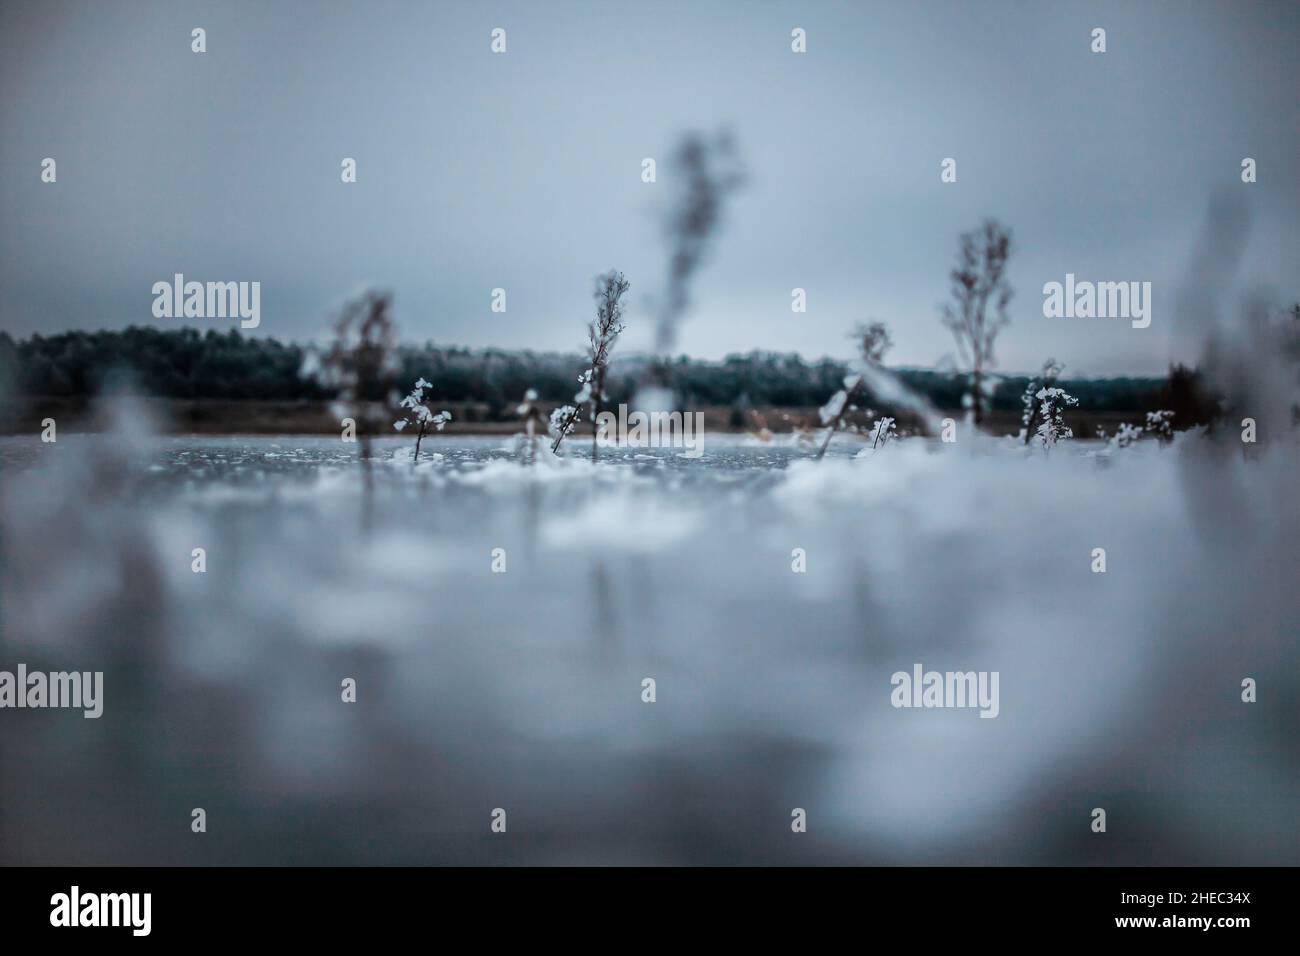 Freelensing photography of frozen plants in frozen lake, Artistic free-lensing photo of snow-covered plants stick out from ice on water, Frozen plants Stock Photo